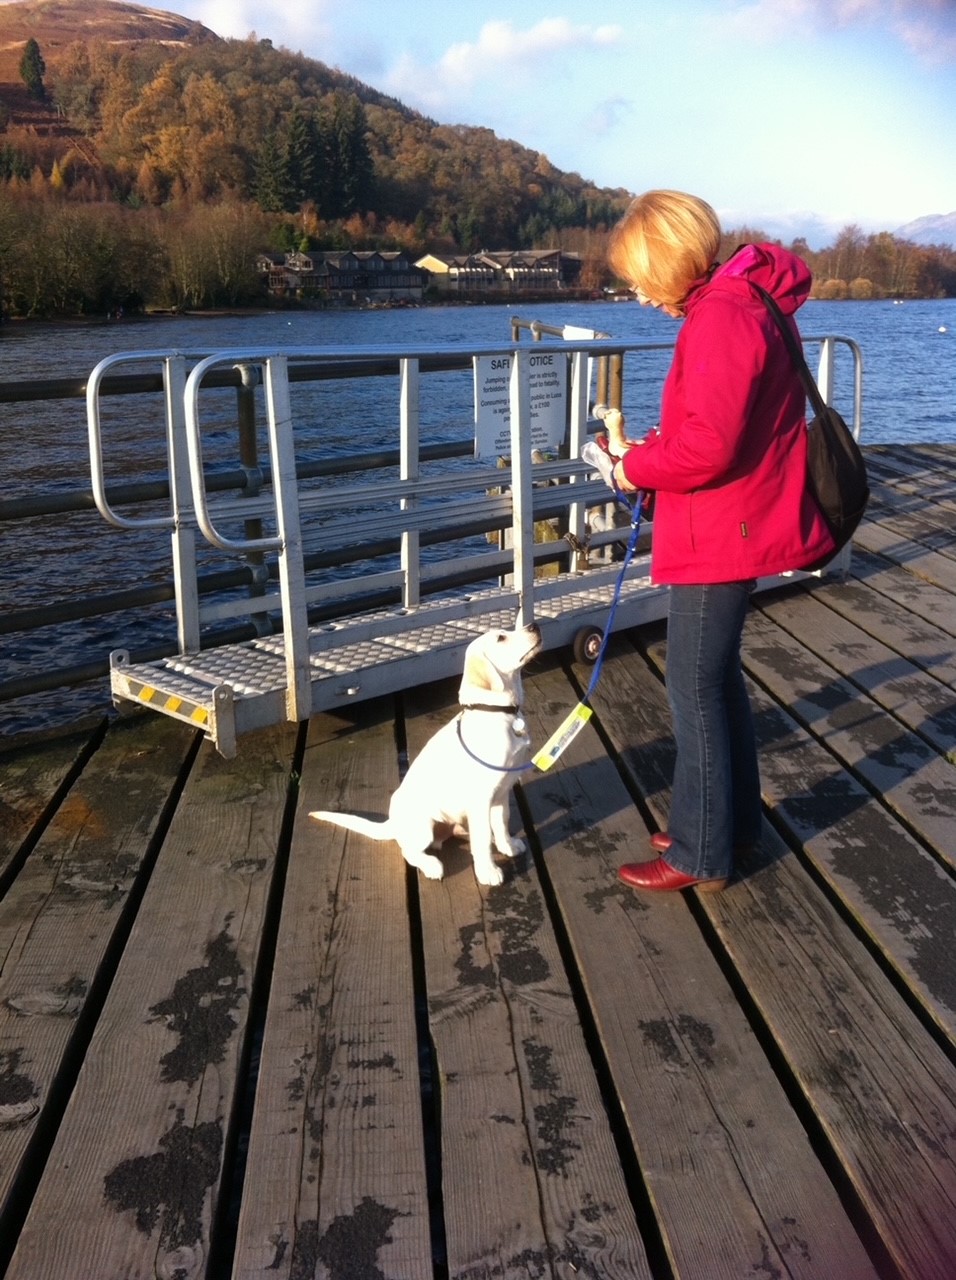 A yellow labrador puppy sits on a wooden dock beside a lake in front of mountains. He has a guide dogs lead on and he looks up at his puppy raiser who is wearing a bright pink coat.